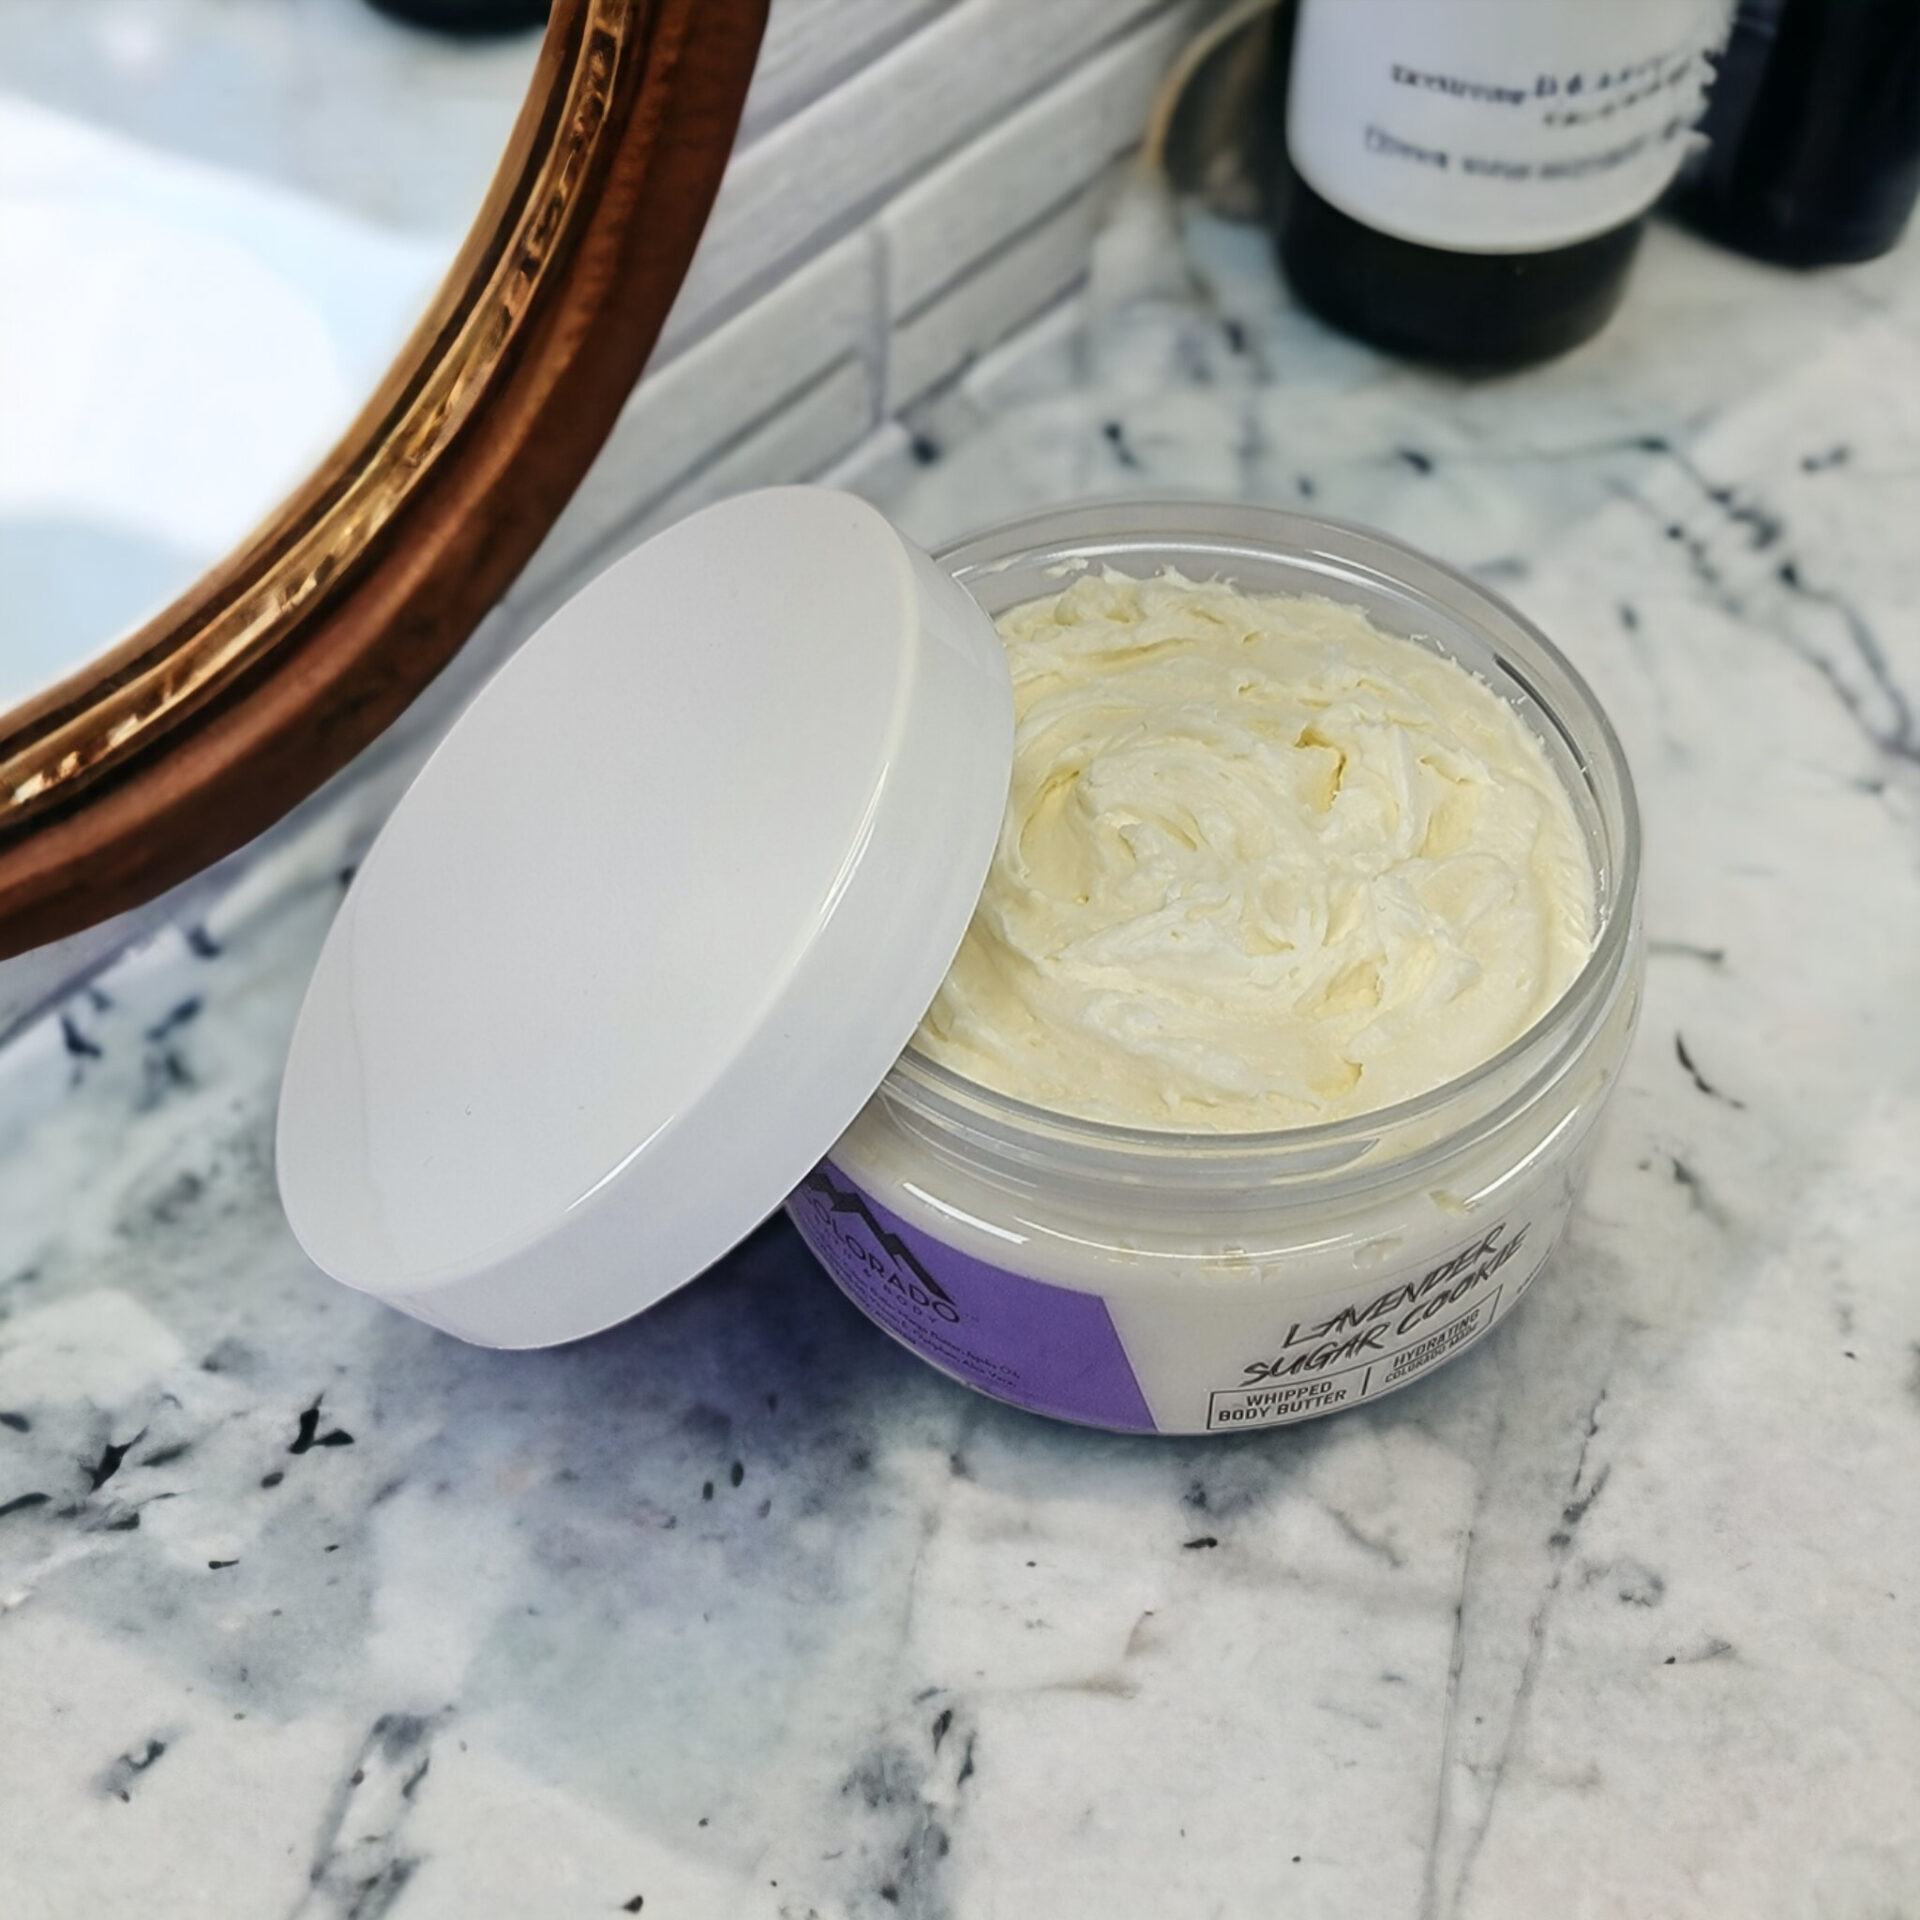 Lavender Sugar Cookie Whipped Body Butter